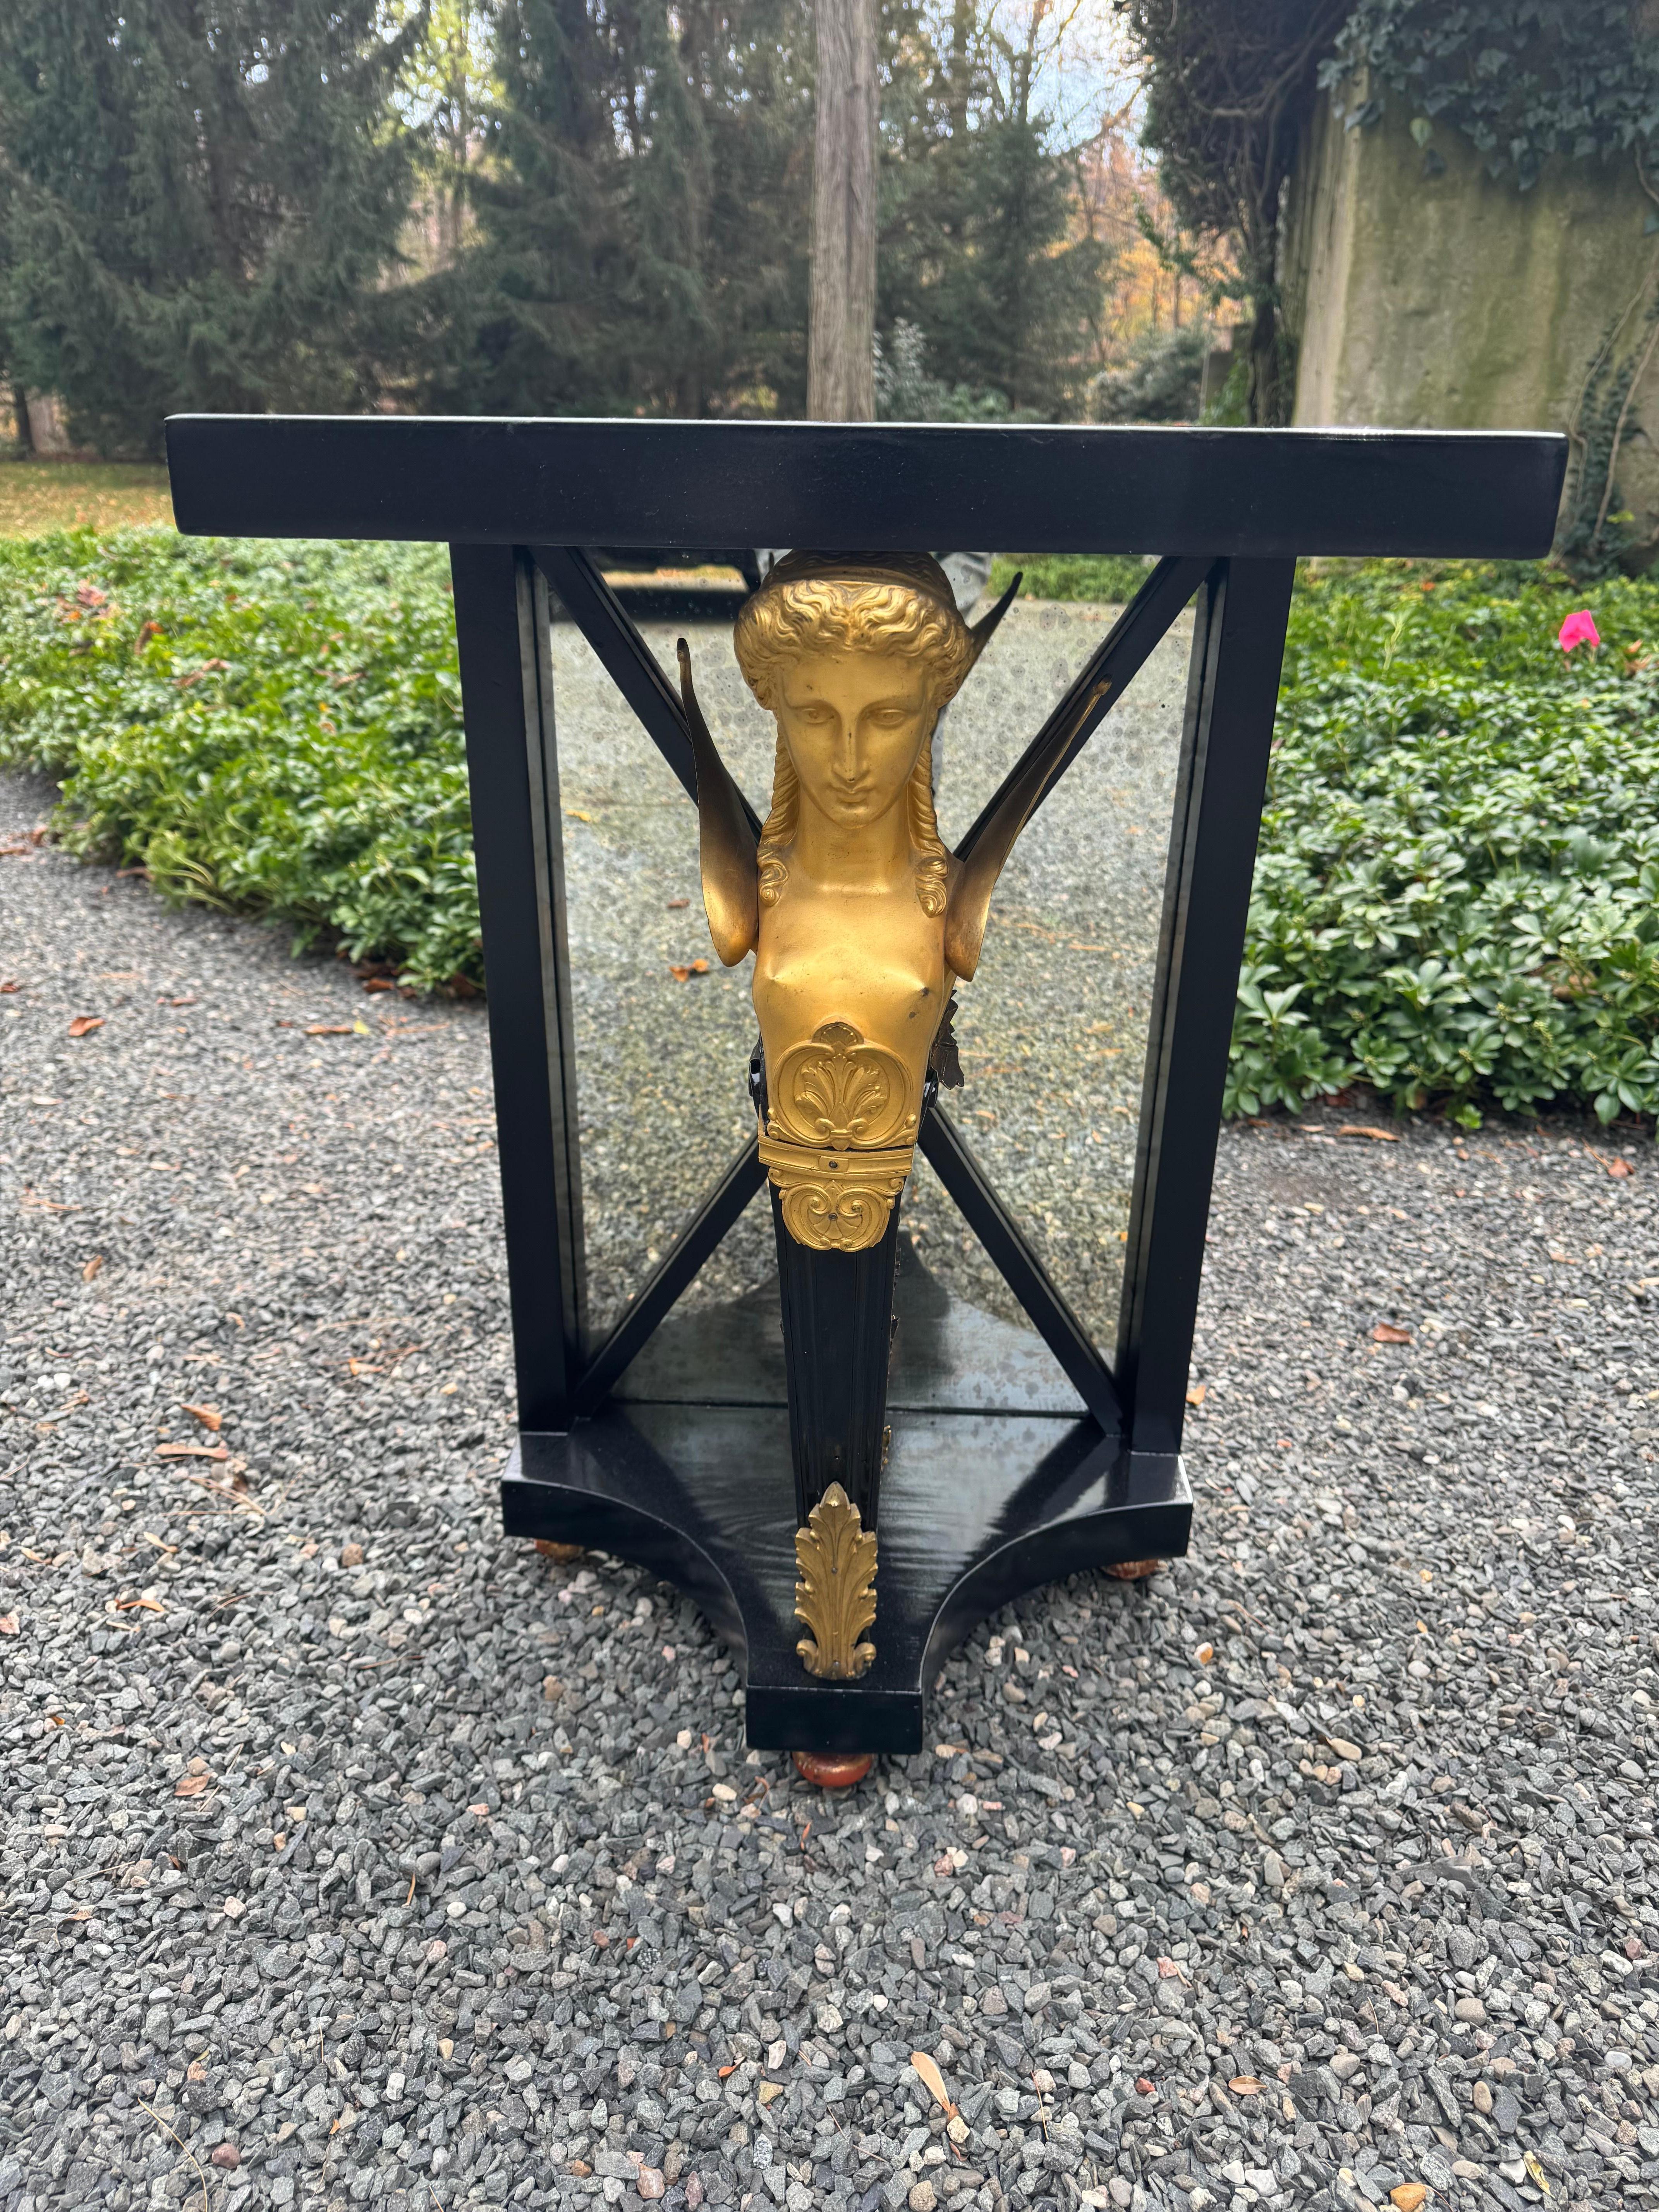 Stunning ebonized and gilt carytid side table in the neoclassical style having black laquered wood and gilt metal mounts with dramatic central figural form.  Table is backed with antique mirror. 